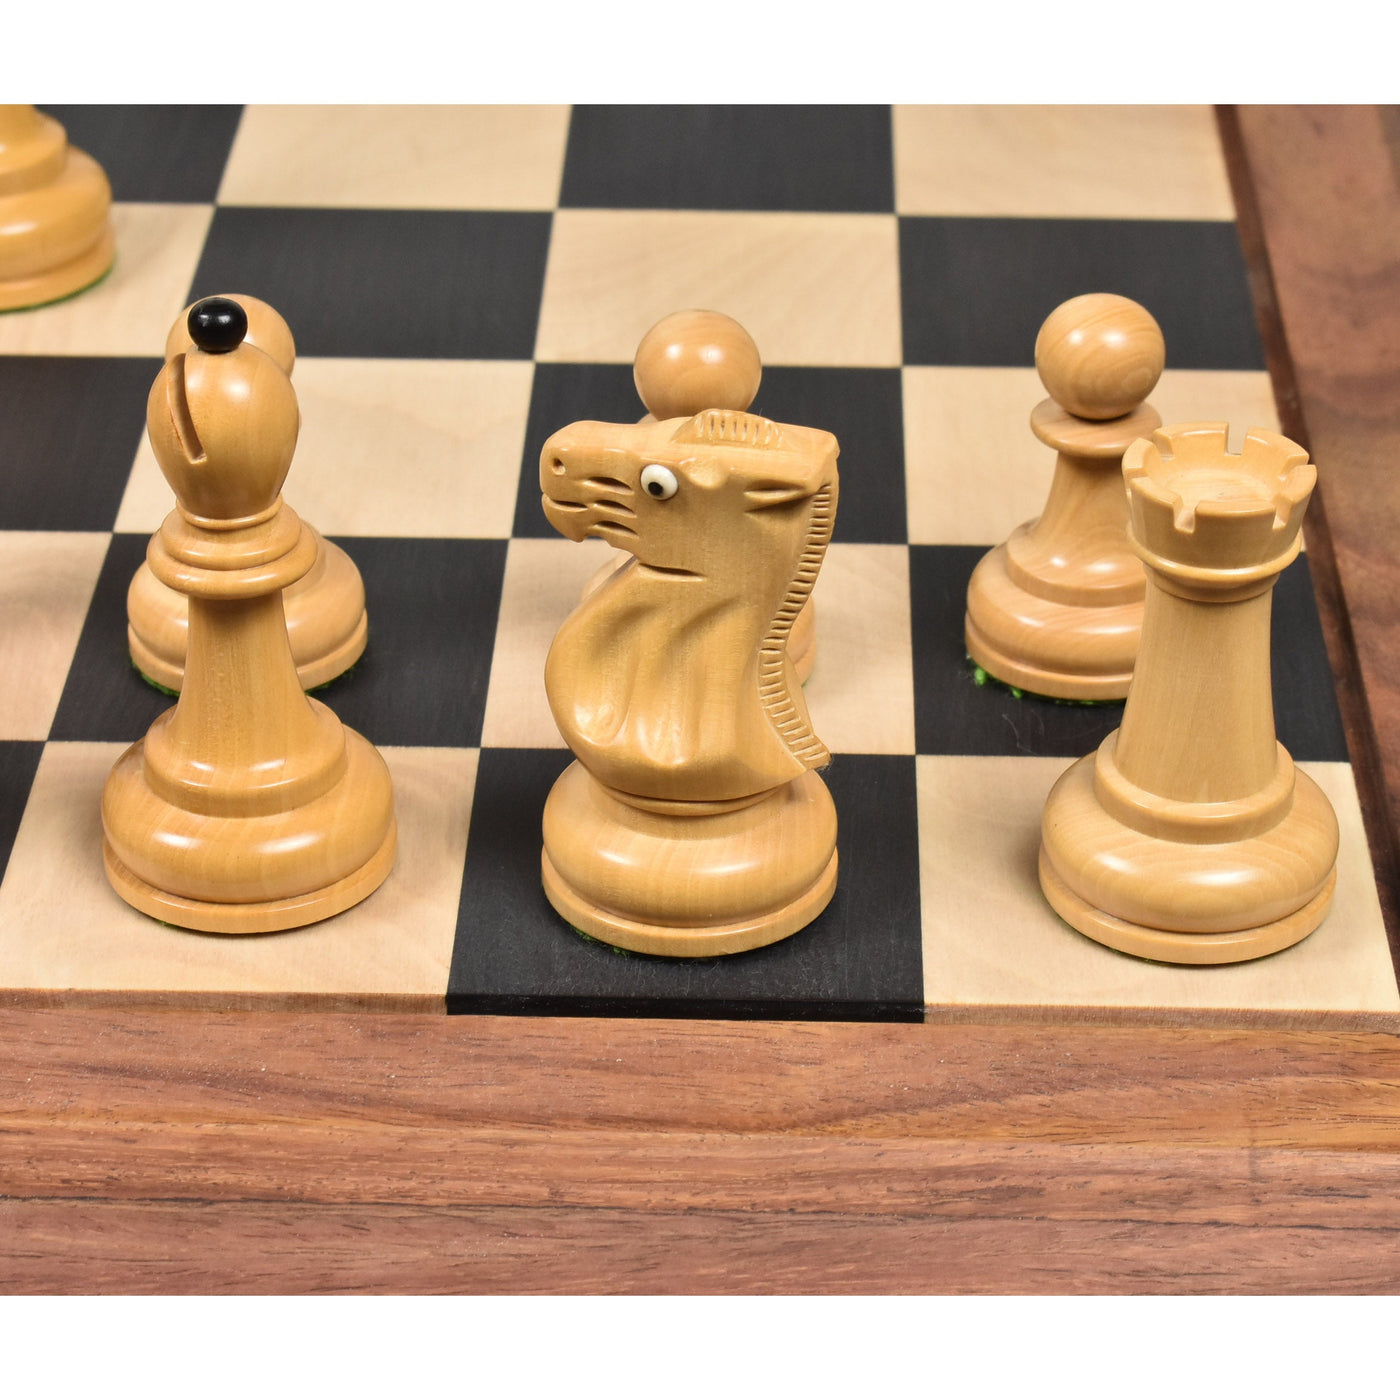 Slightly Imperfect 3.7" Soviet Grandmaster Supreme Chess Set - Chess Pieces Only in Boxwood- Glass Eyes